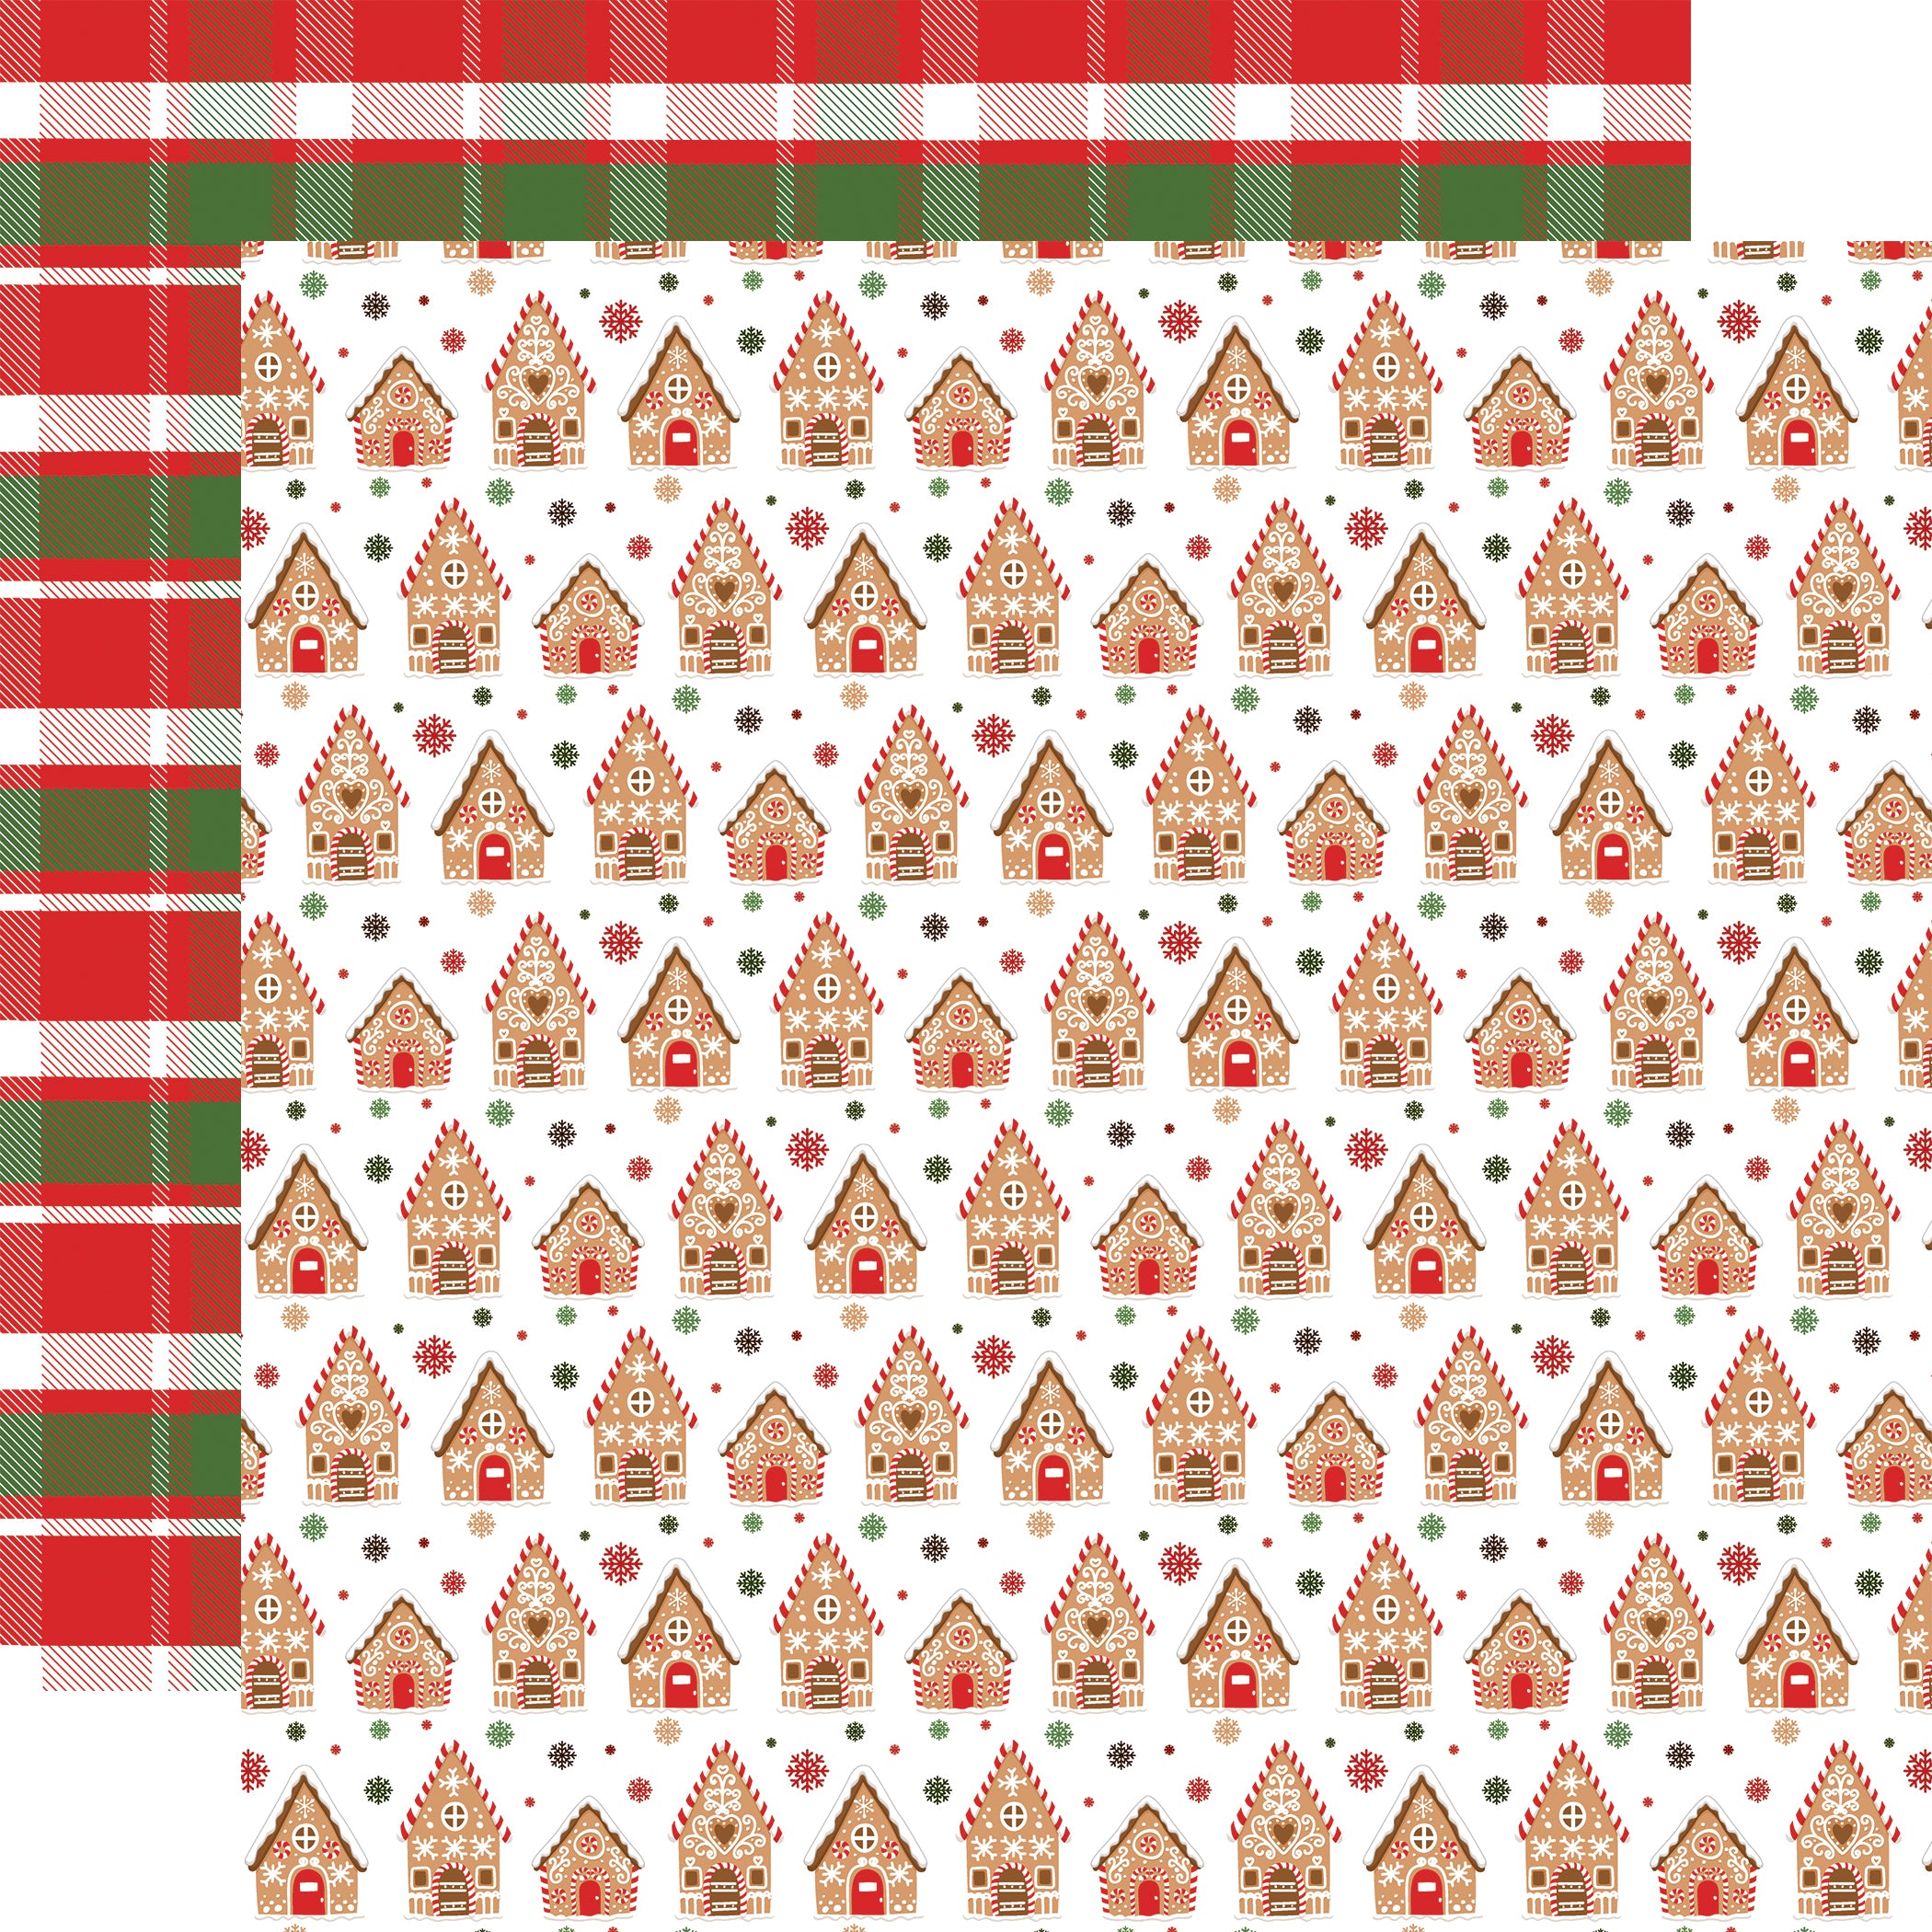 Have A Holly Jolly Christmas Collection Cozy Gingerbread House 12 x 12 Double-Sided Scrapbook Paper by Echo Park Paper